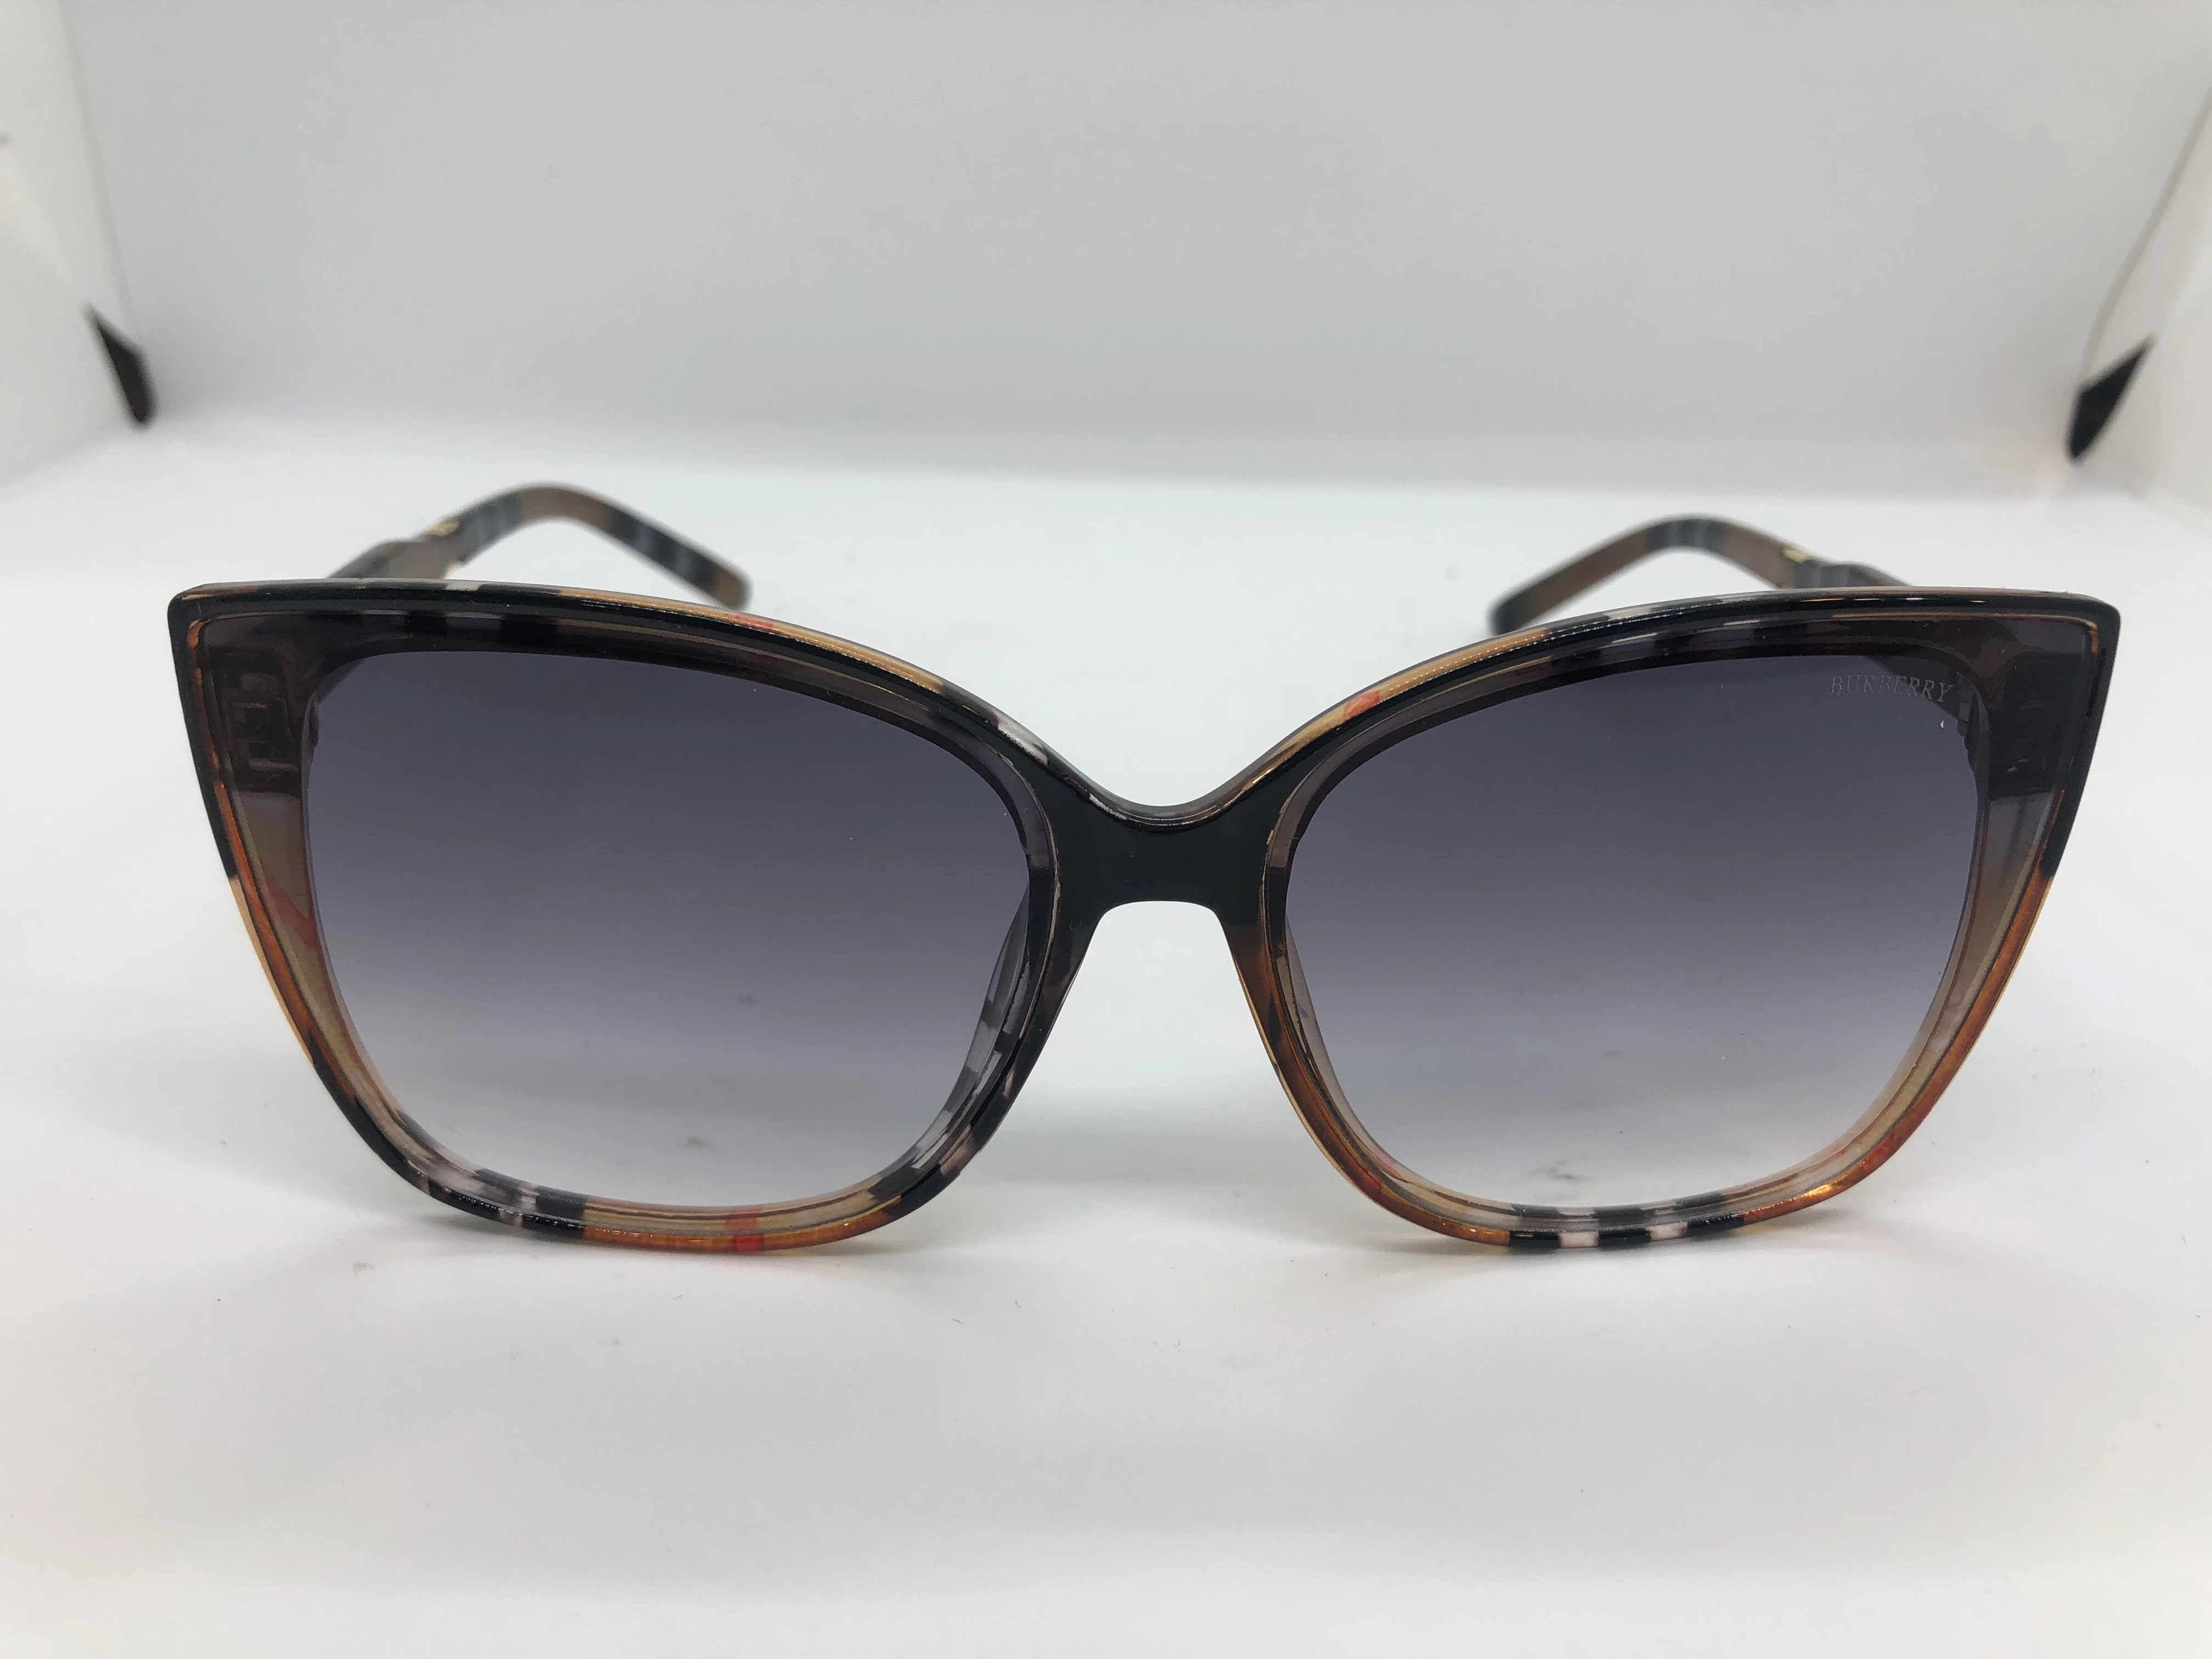 Sunglasses - from Burberry - with a Burberry polycarbonate frame - black gradient lenses - black * golden polycarbonate arms - with the brand logo - for women